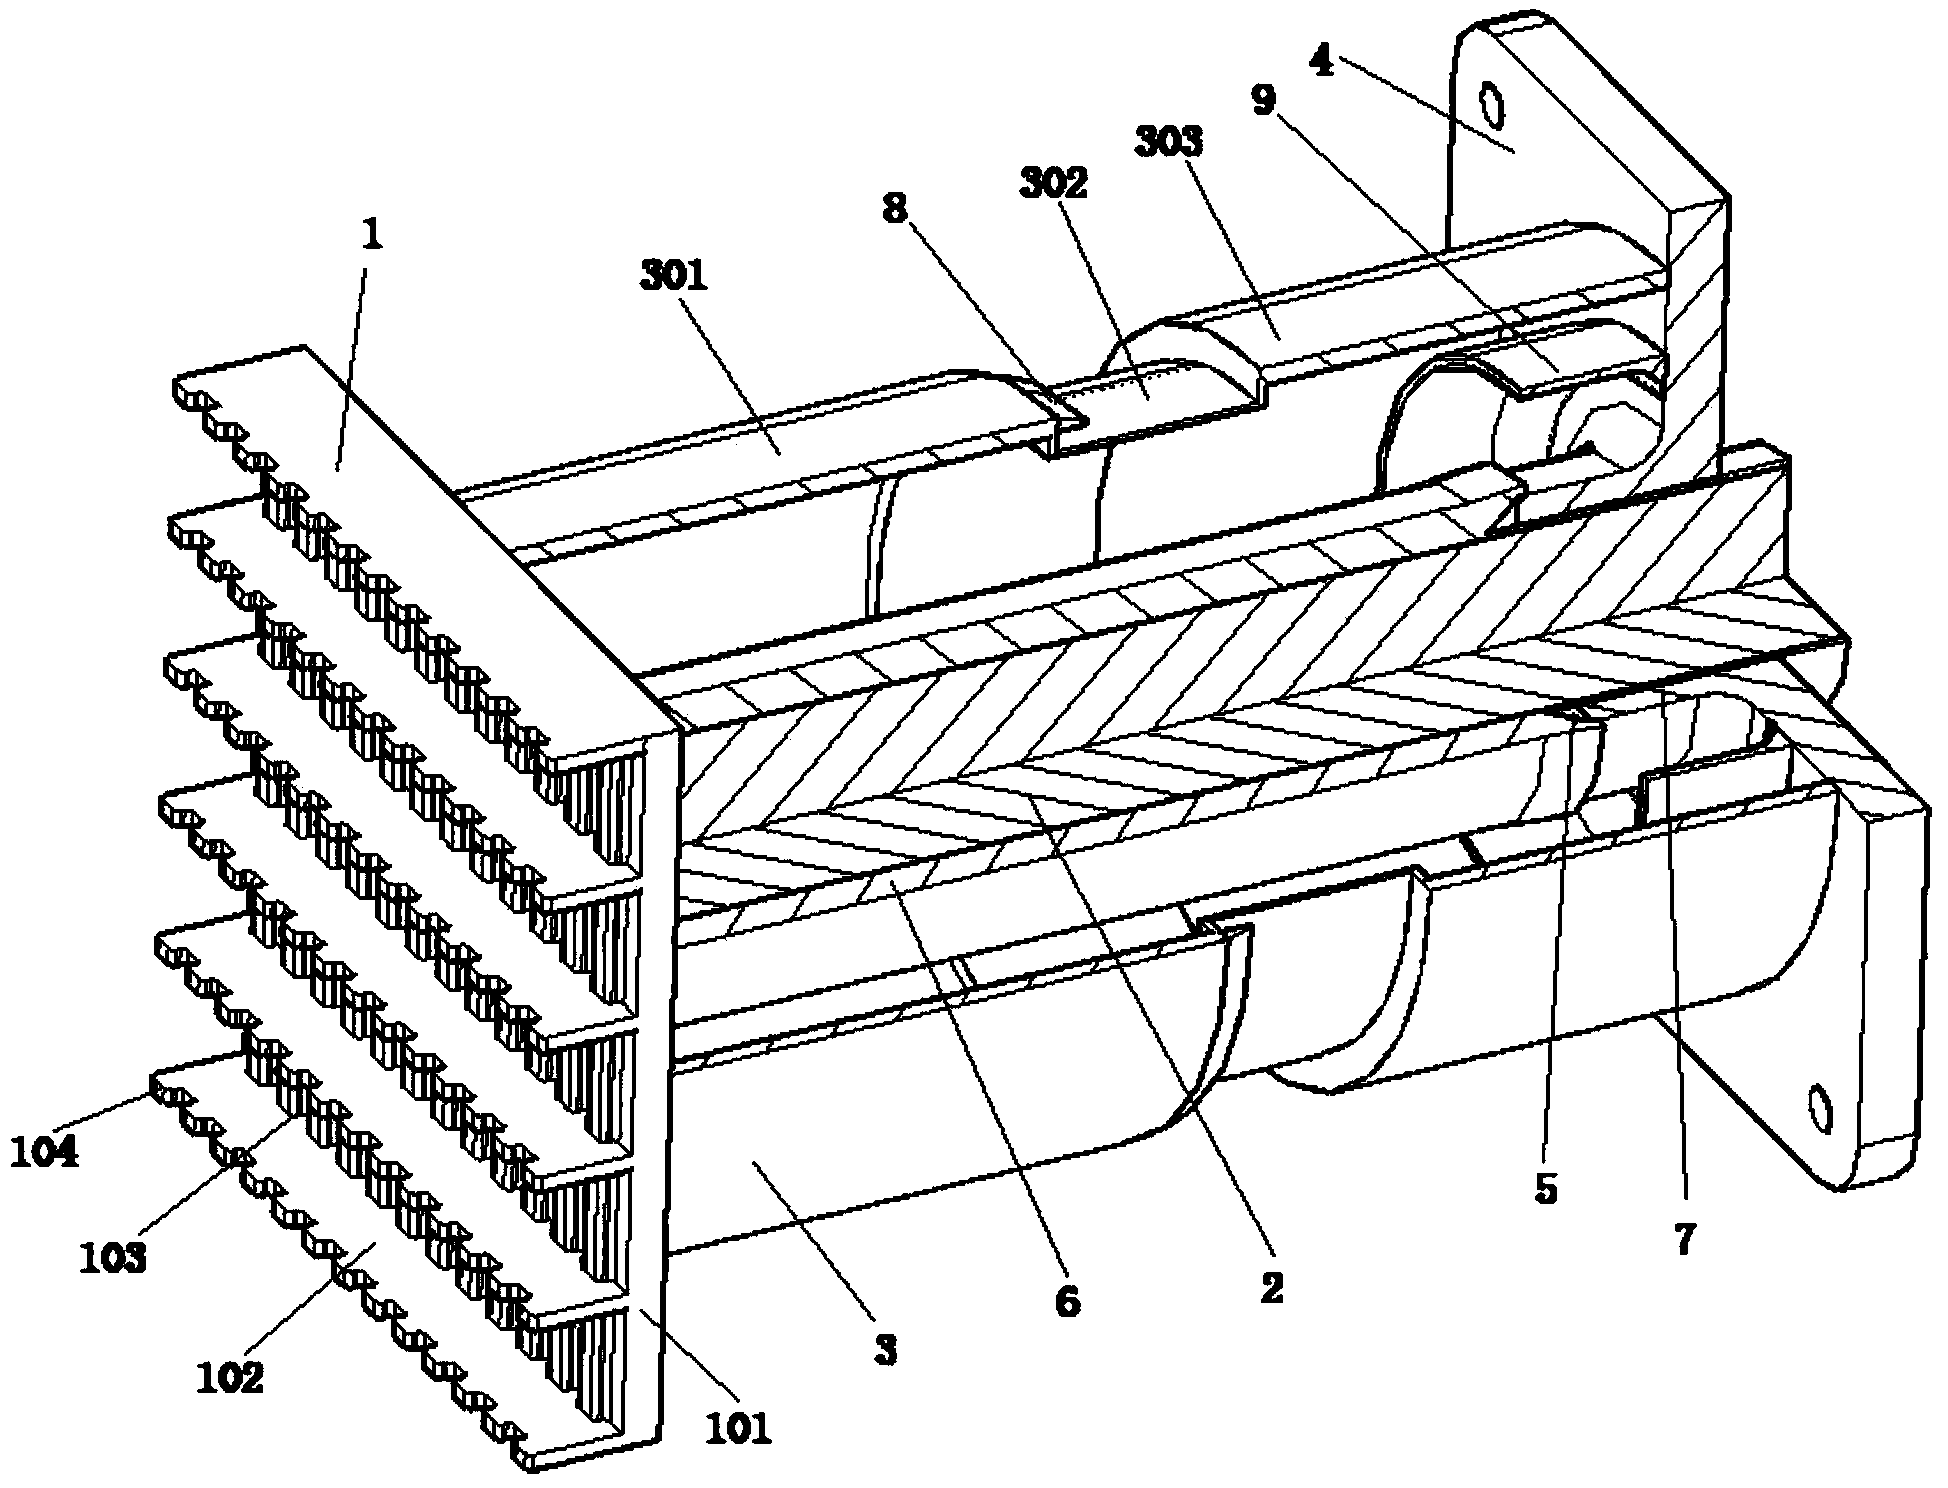 Energy absorbing anti-creep device for track traffic vehicles